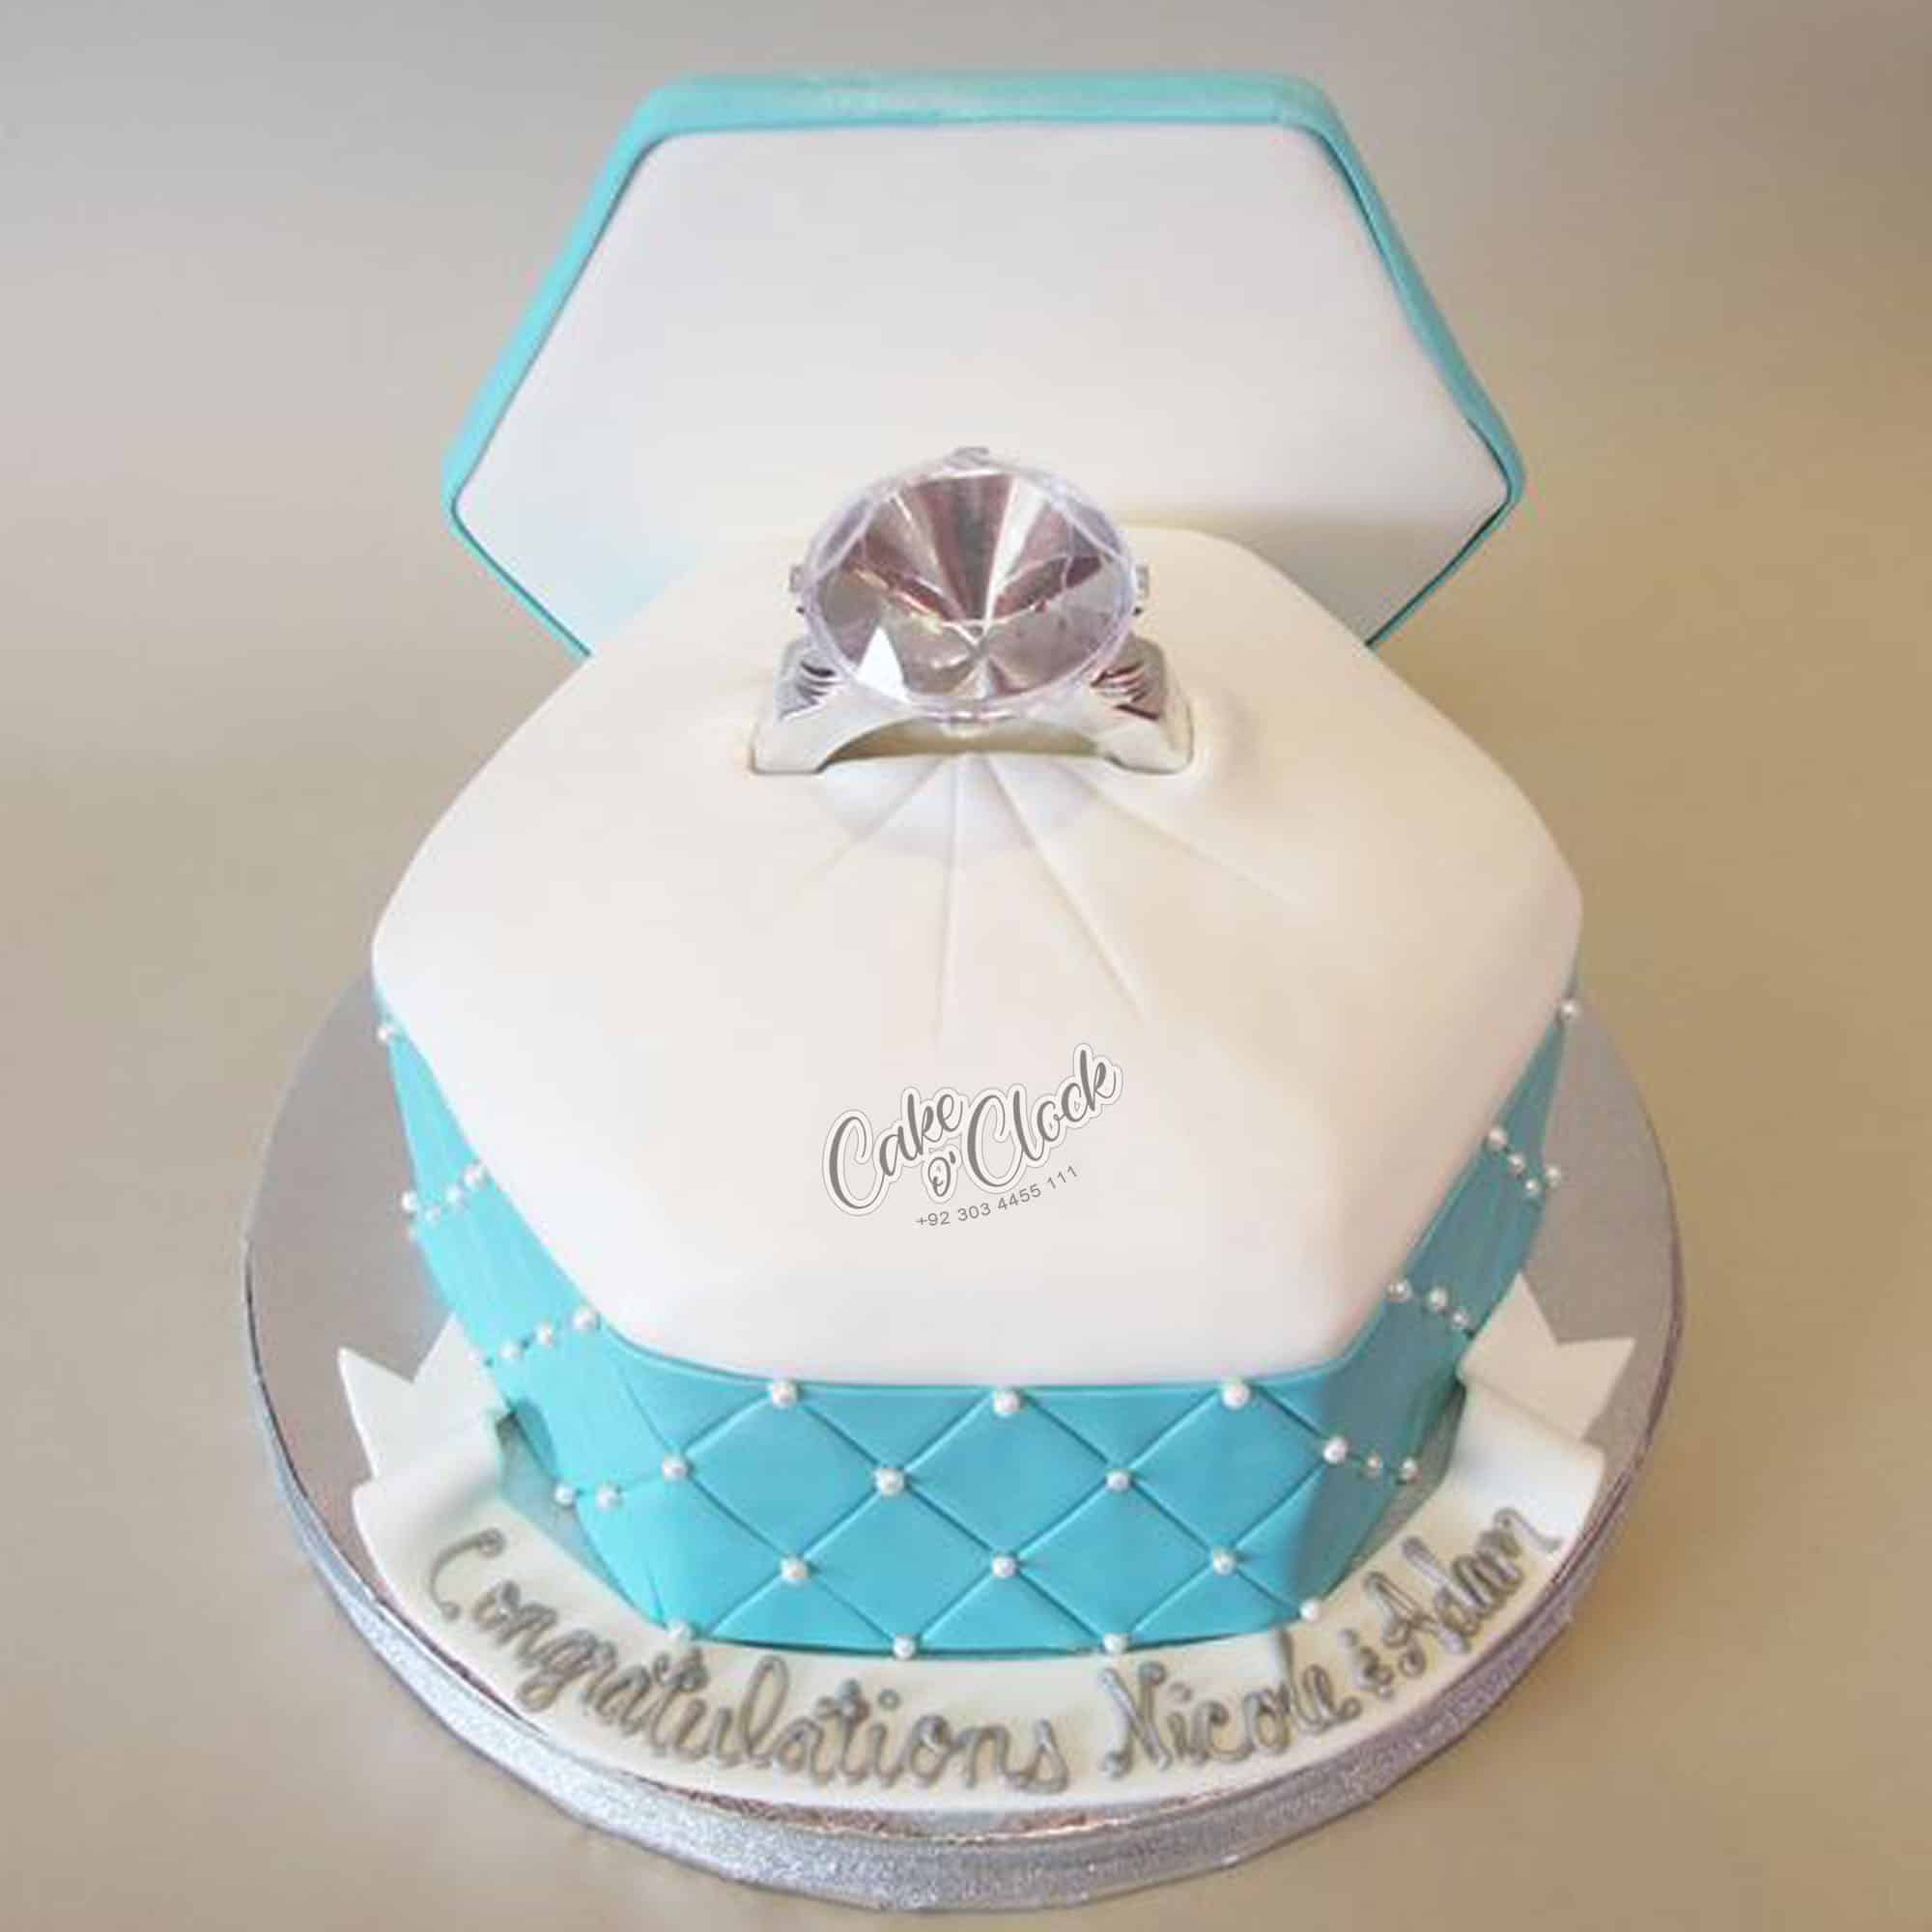 Customized Fancy Engagement Cakes Order in Faisalabad - BusinessBook.pk